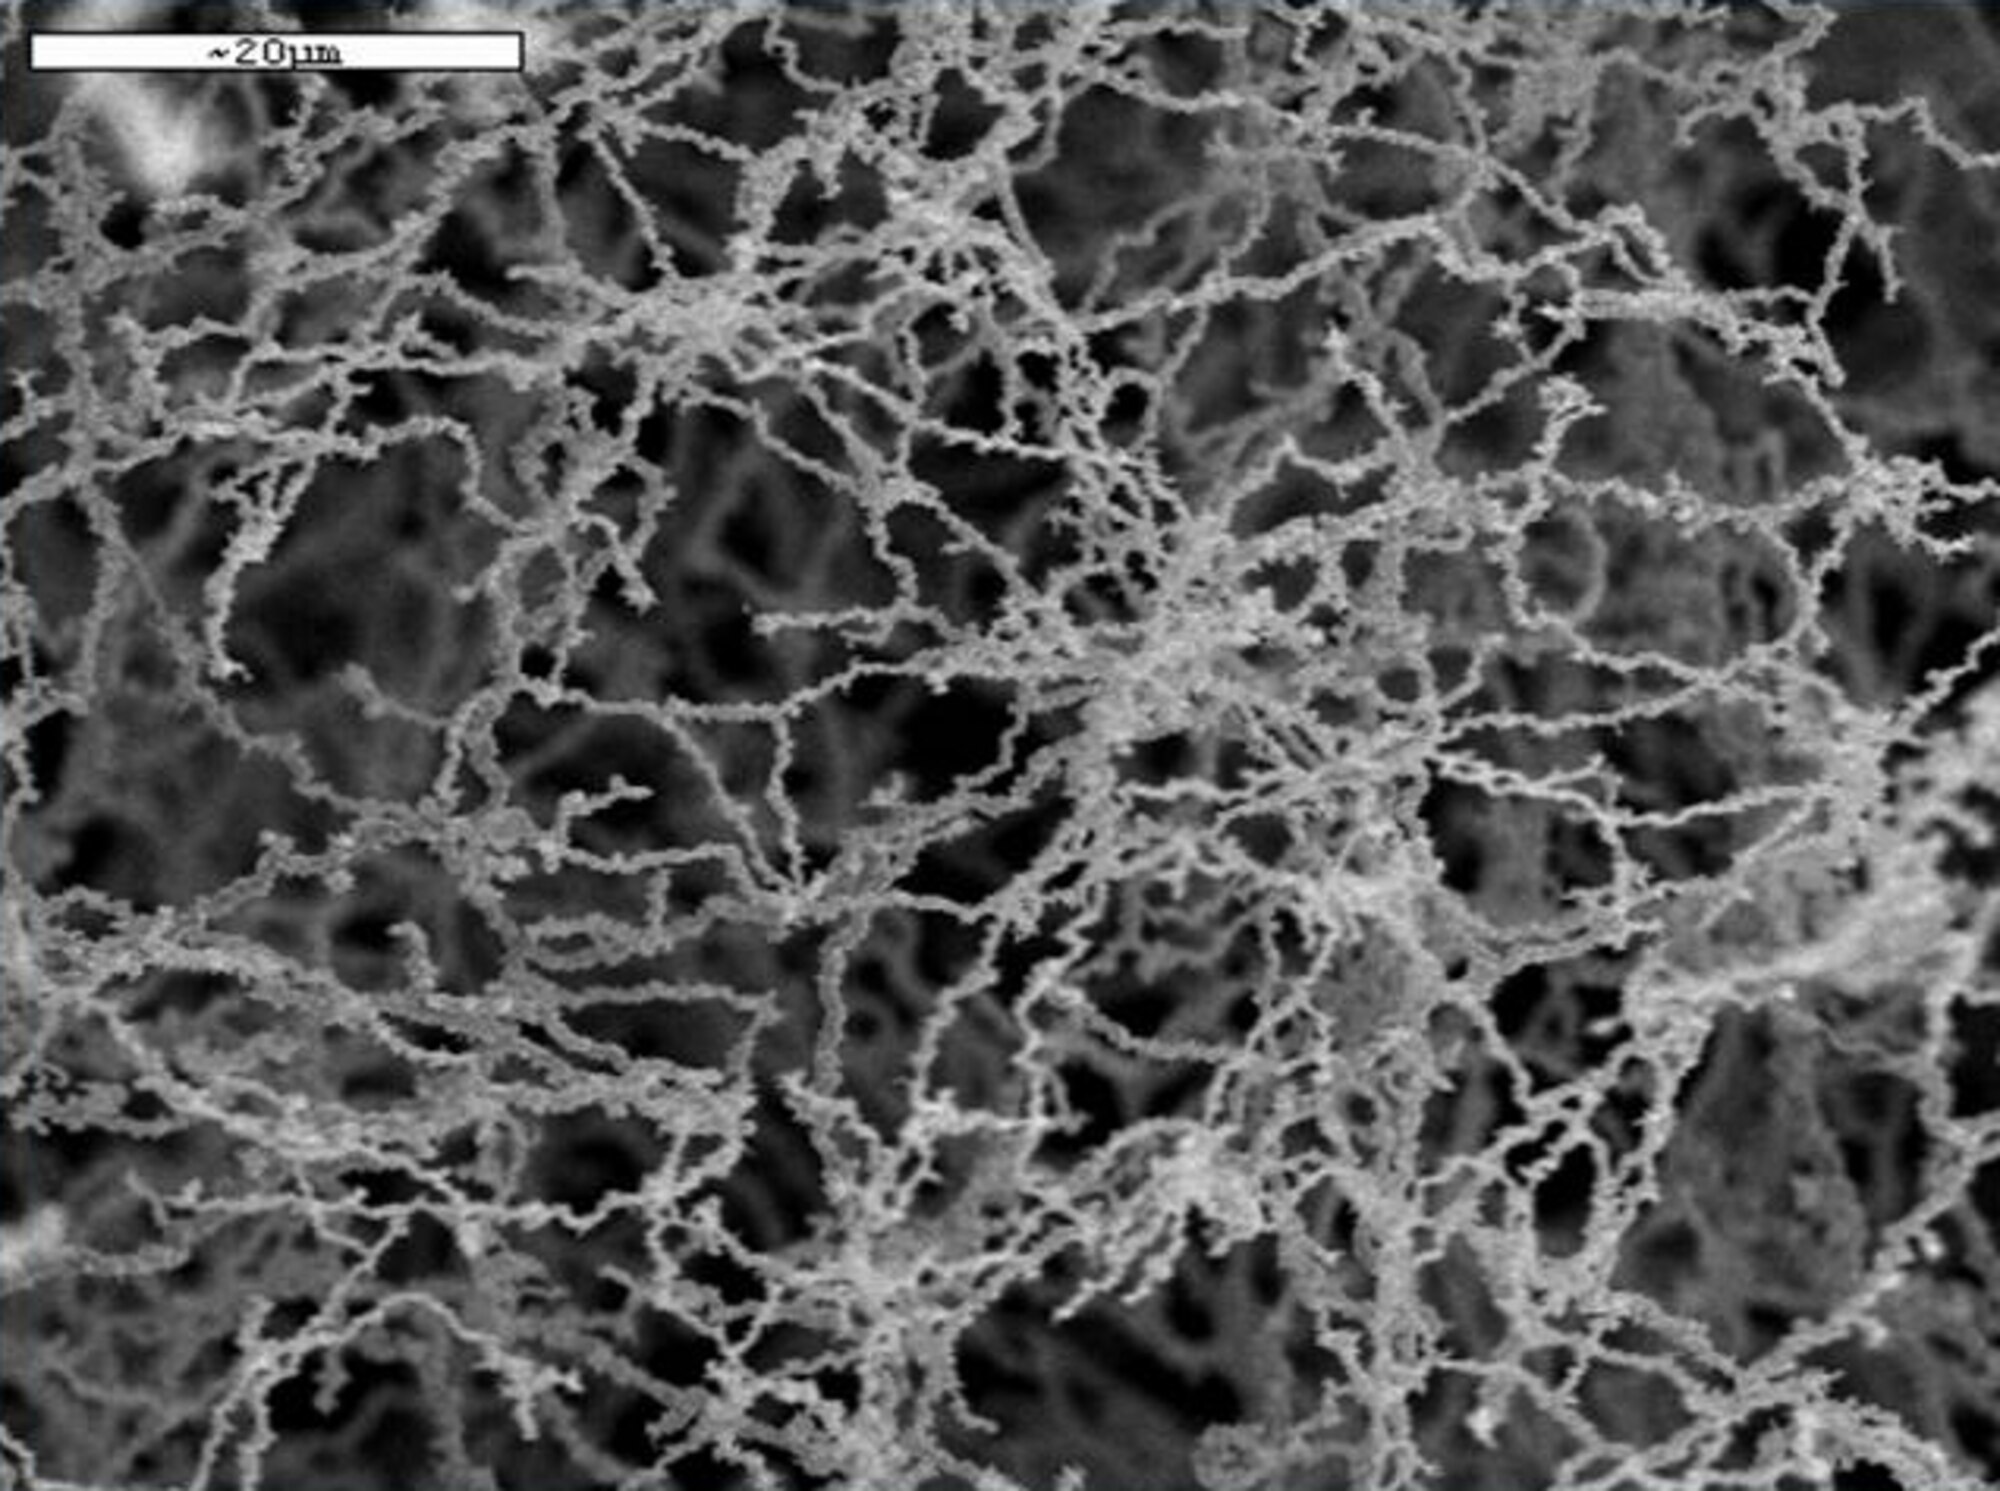 A Scanning Electron Microscope image of nickel nanostrands: 1000 X (20 µm scale bar).  (AFRL Image)